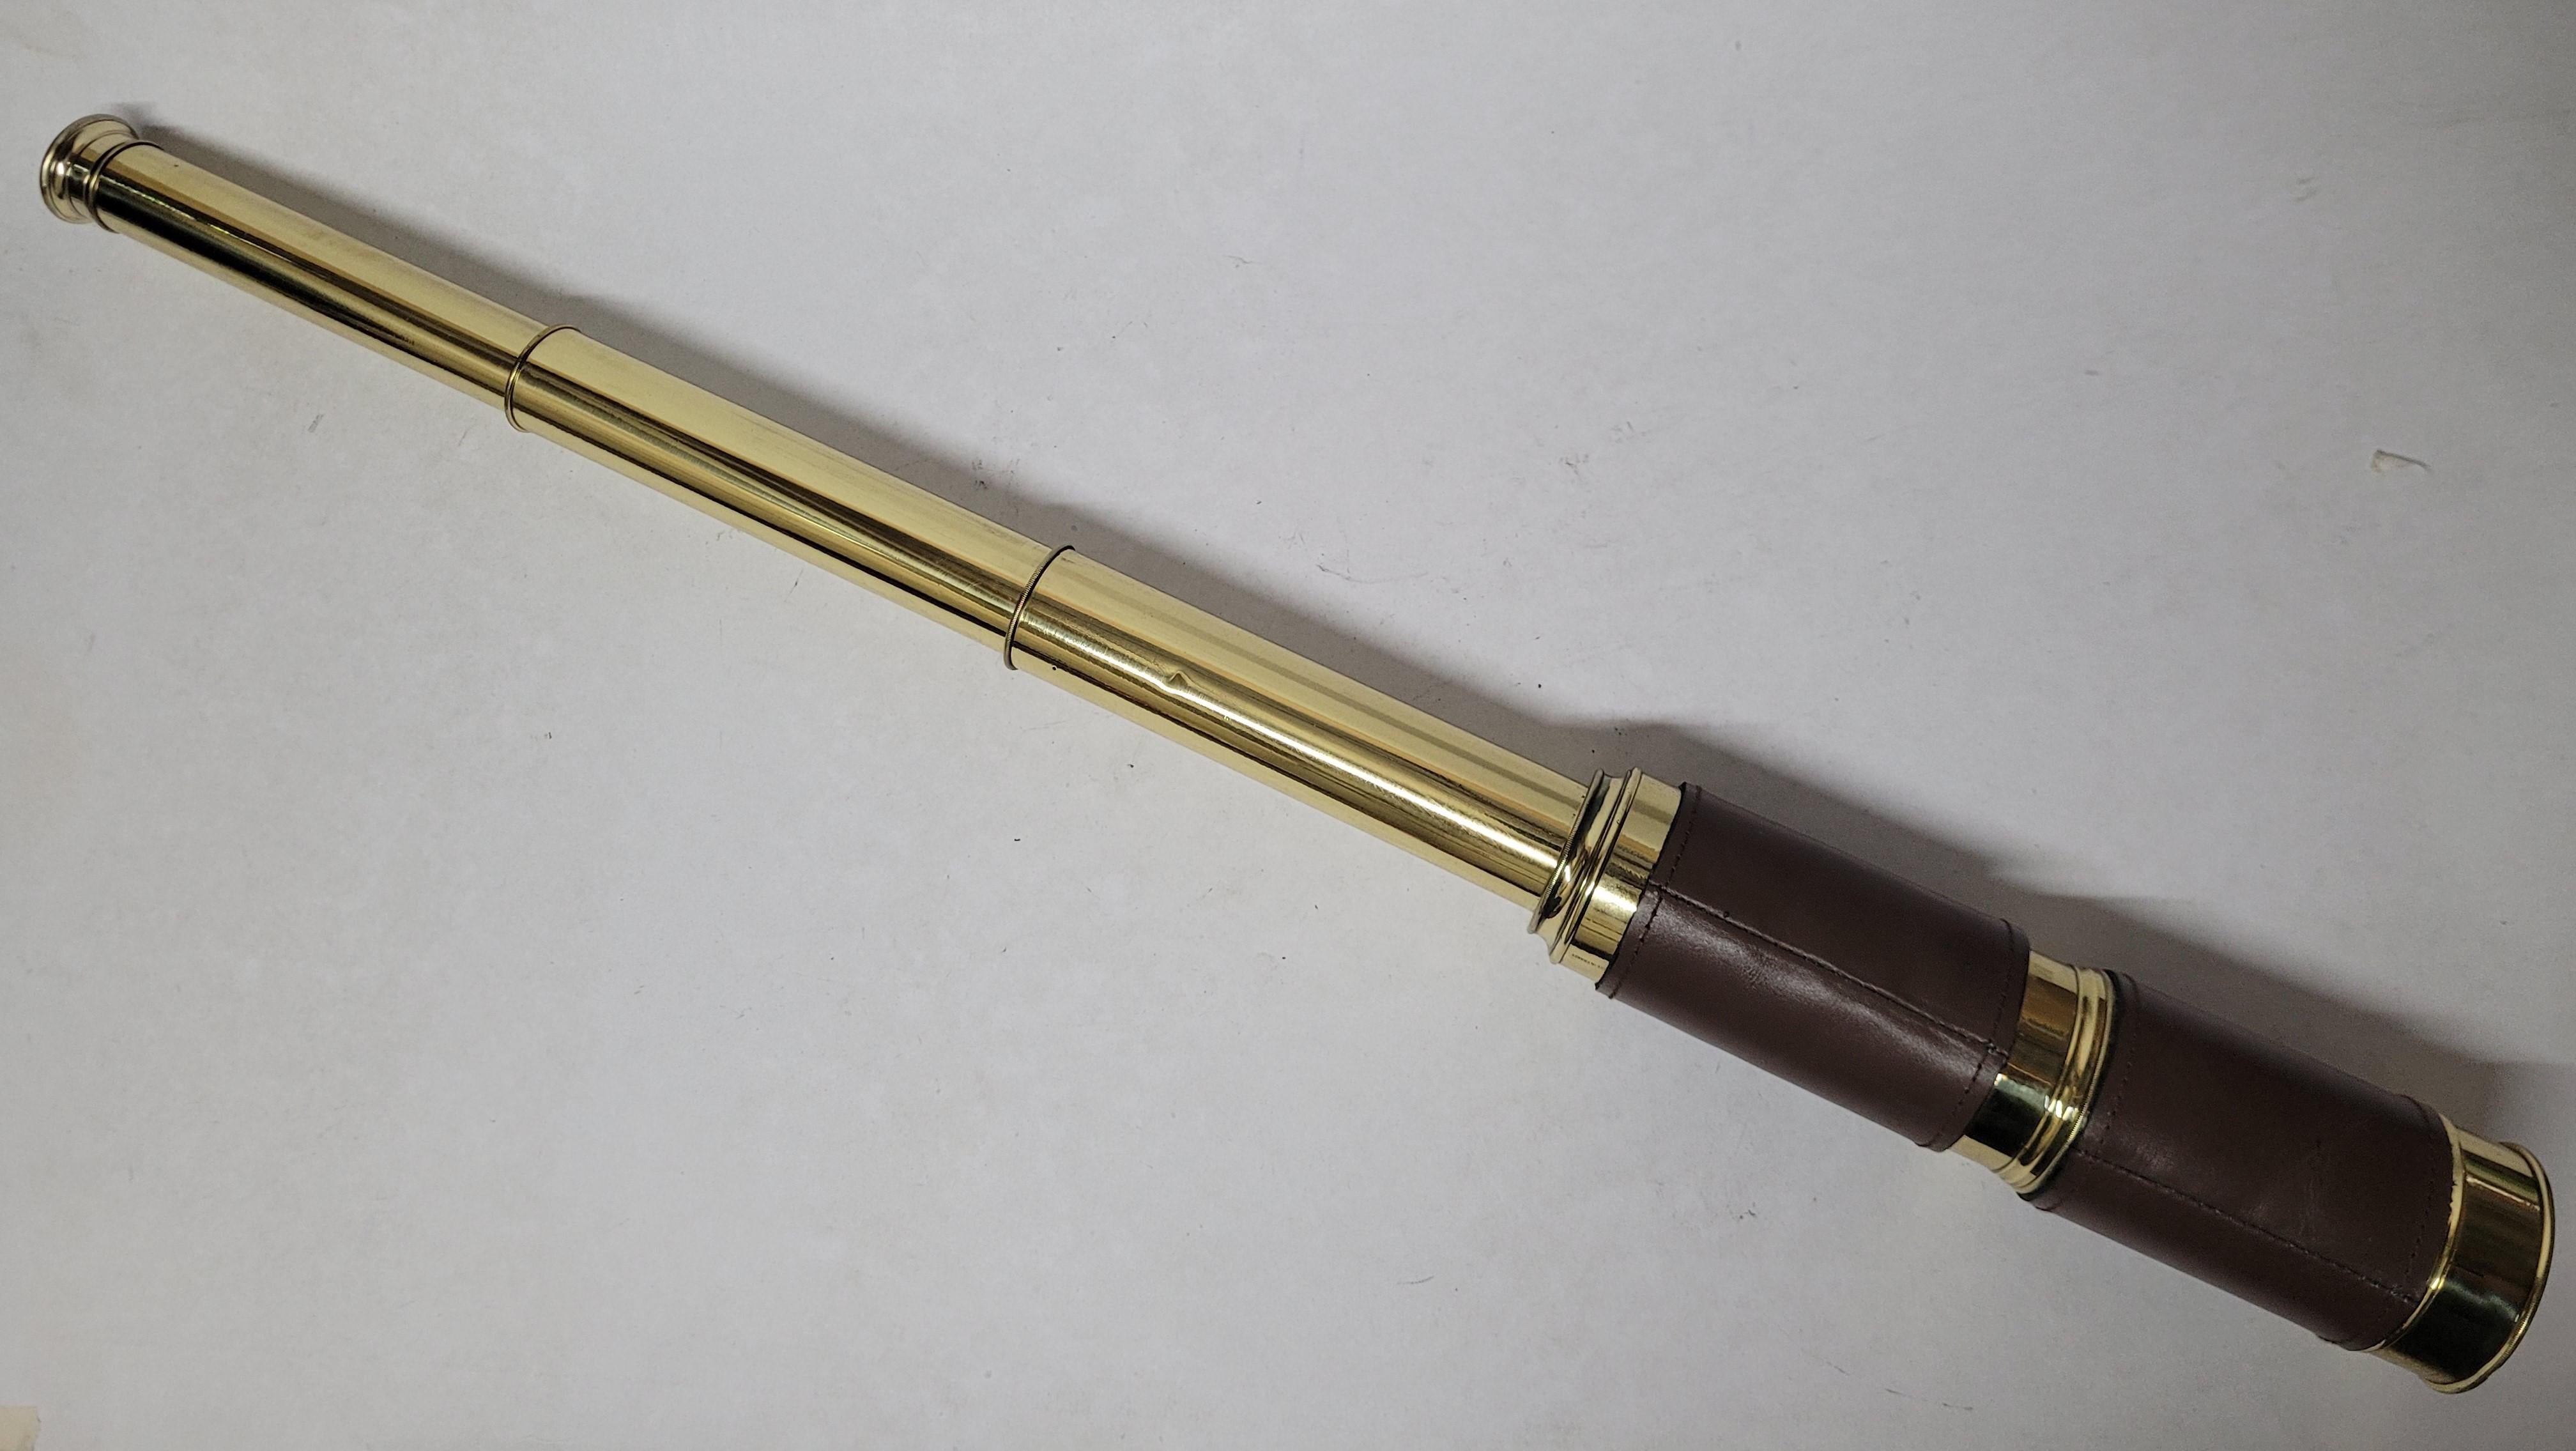 Ships spyglass telescope appropriate for use on a yacht, ship, or anywhere with a view. This has been meticulously polished and lacquered. We just restored a great collection of these. This fine instrument has a triple draw barrel of solid brass